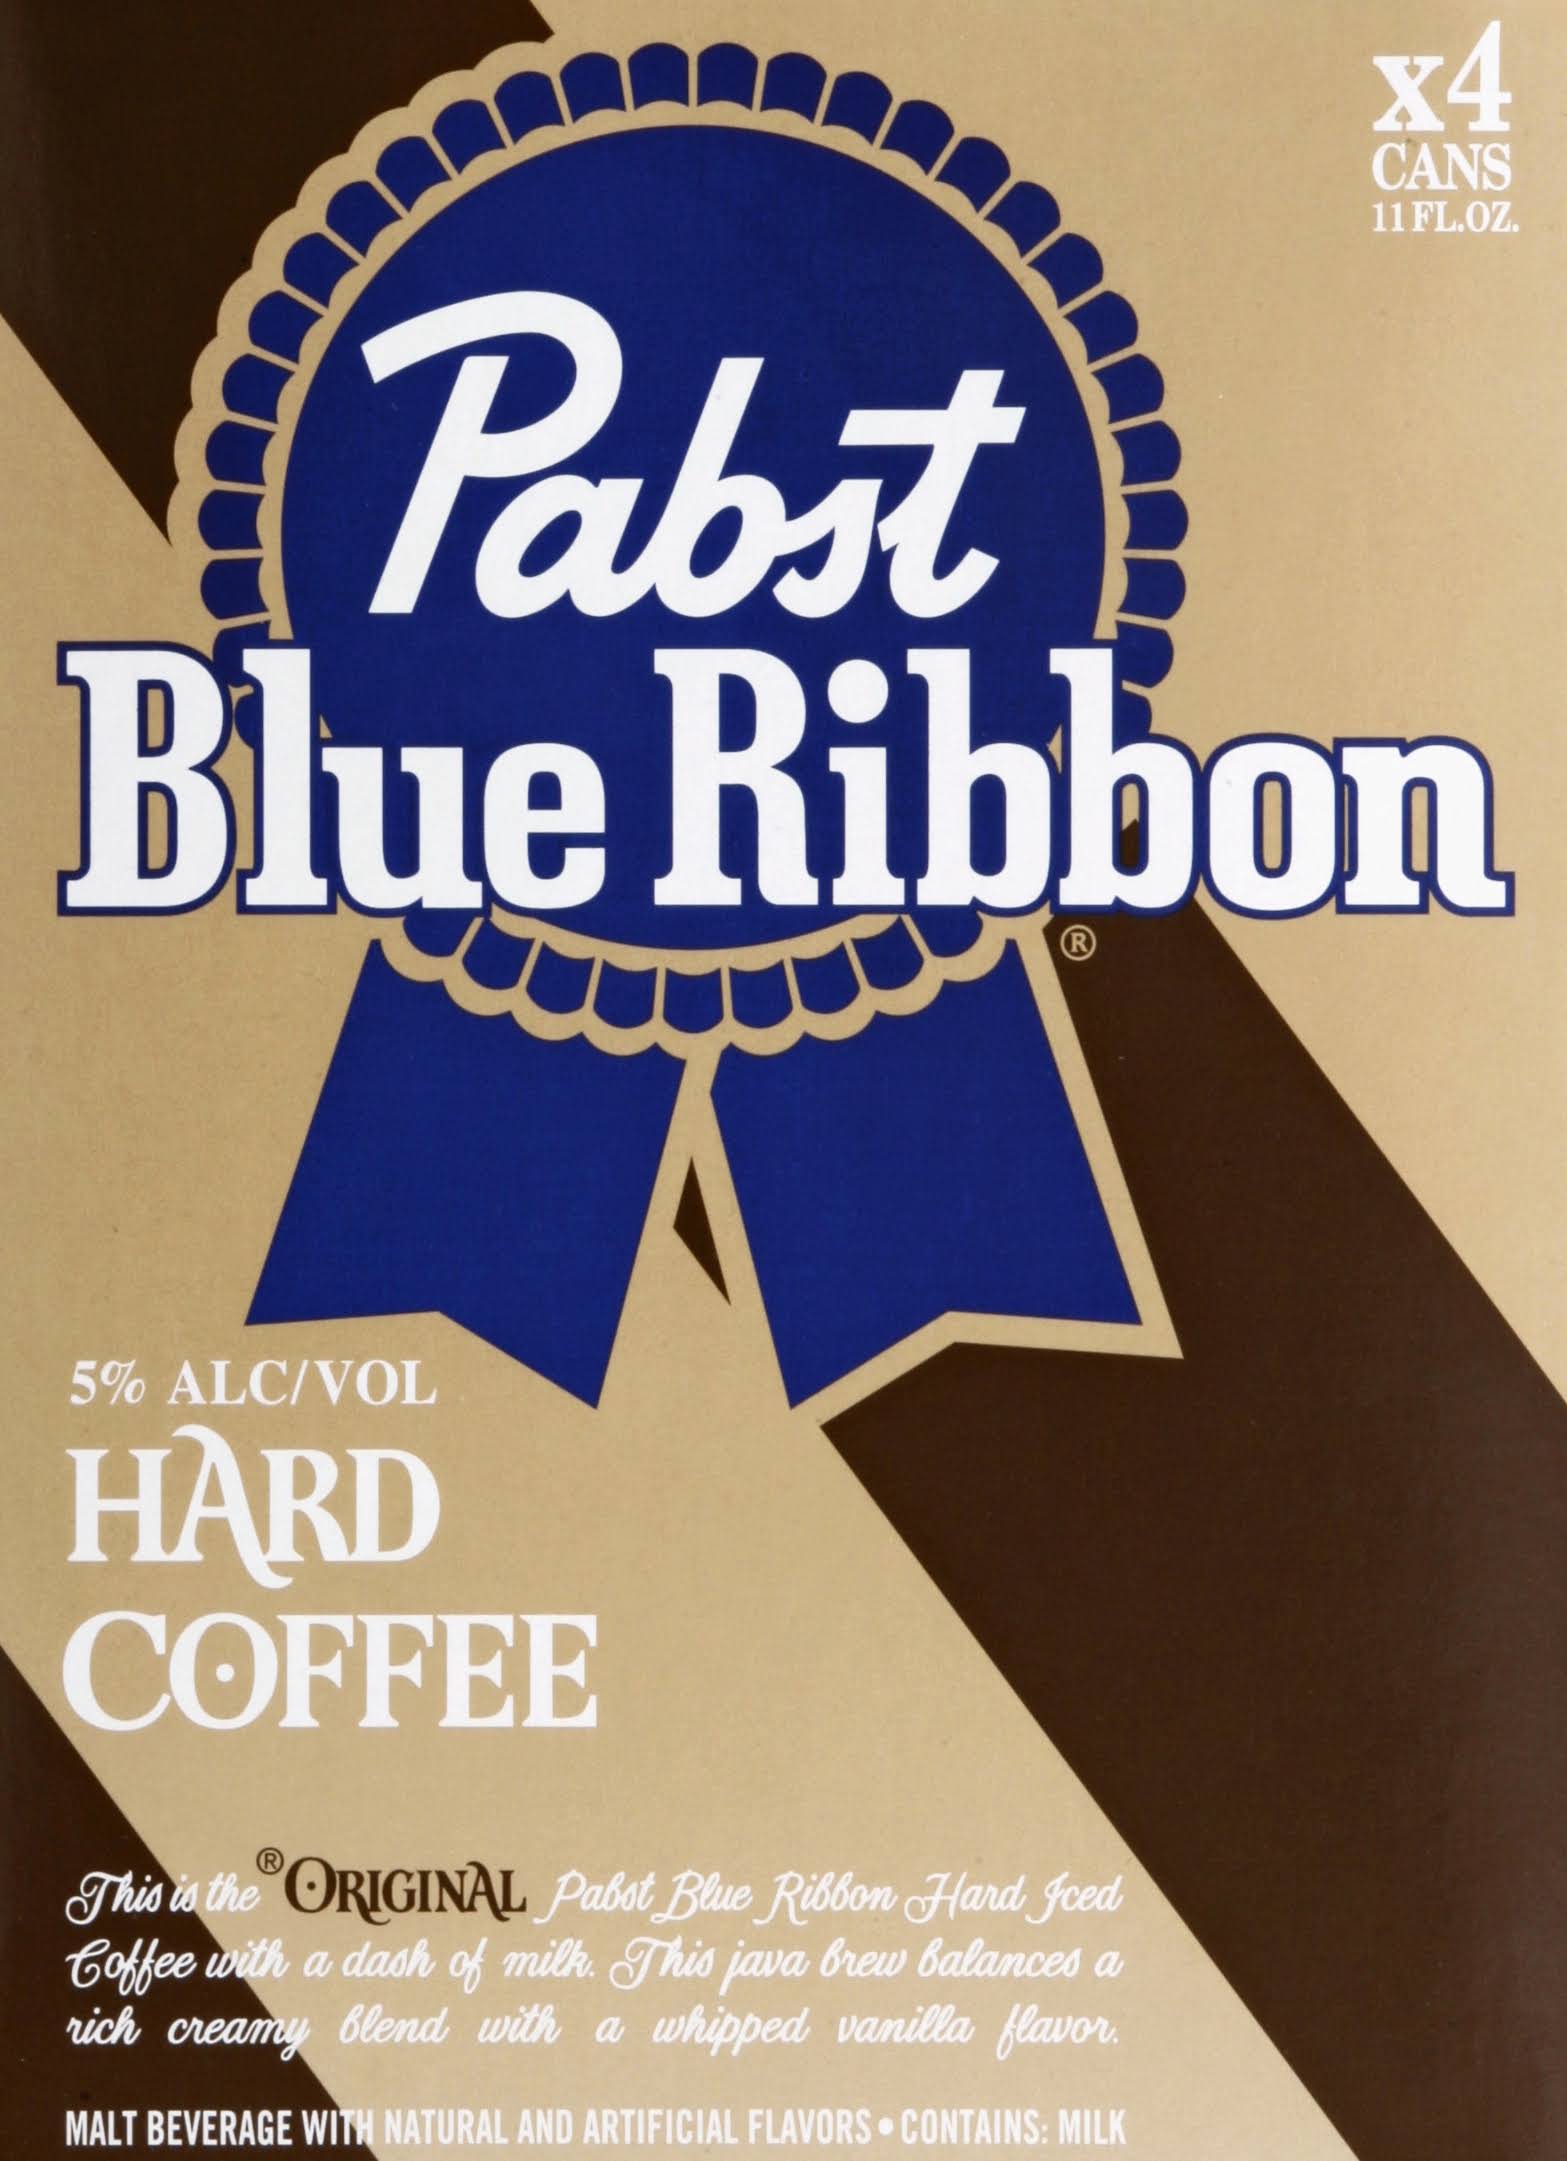 Pabst Hard Coffee - 4 pack, 11 oz cans